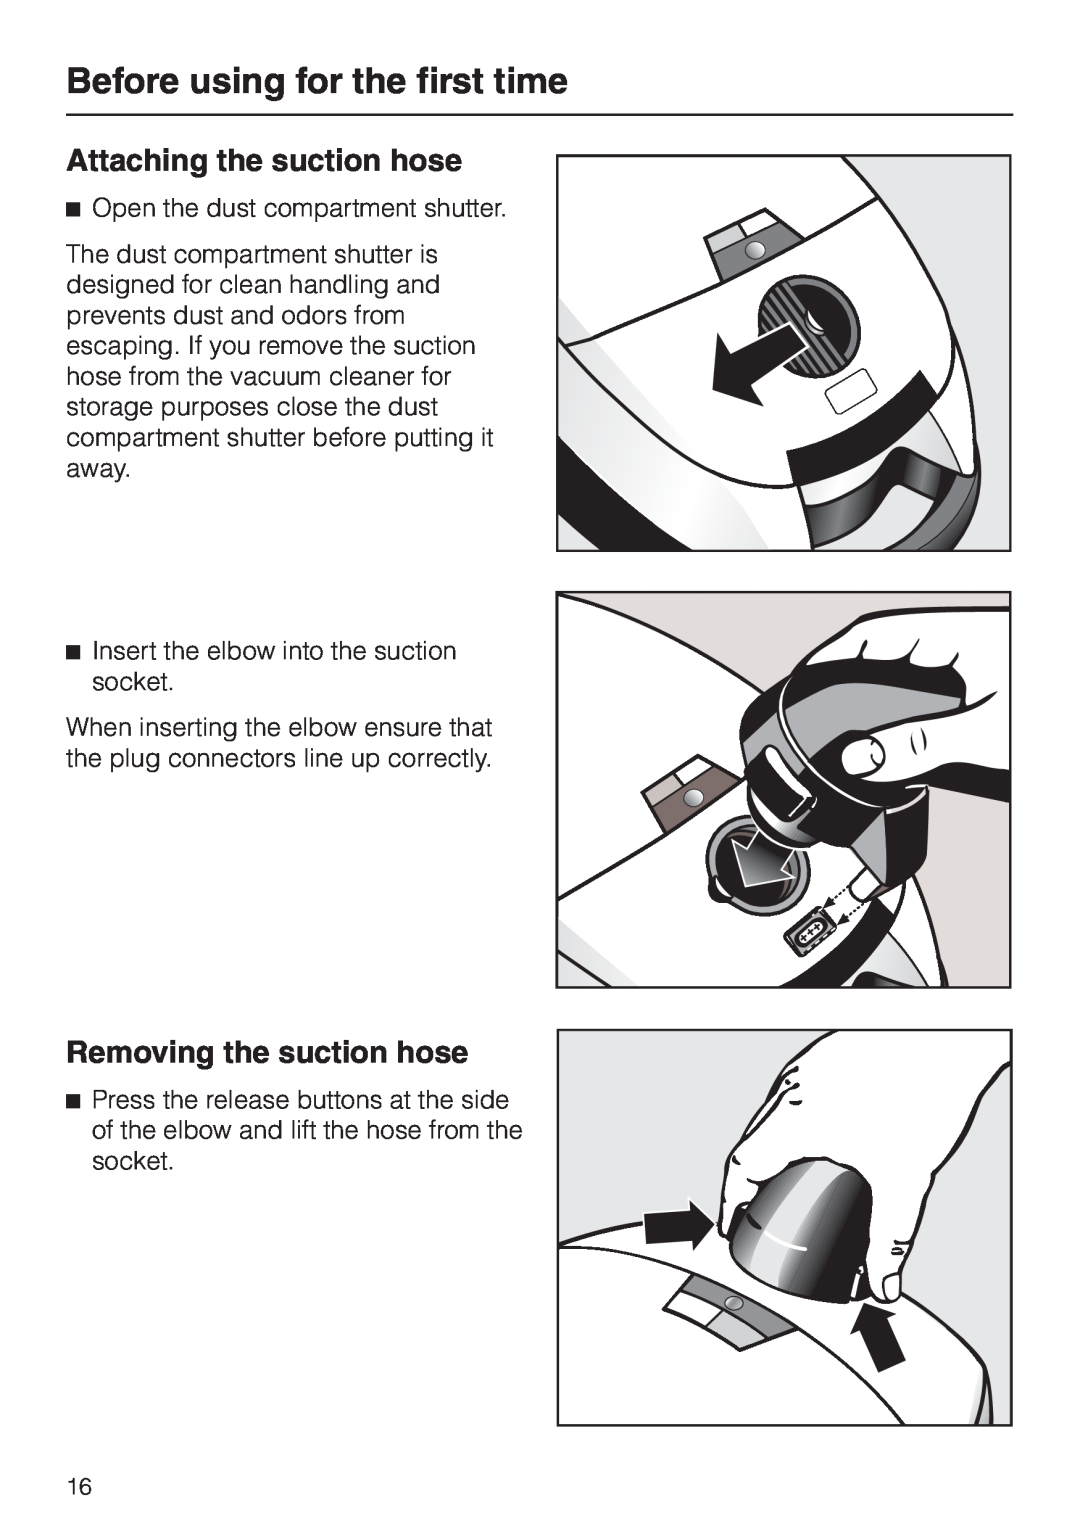 Miele S 658 manual Before using for the first time, Attaching the suction hose, Removing the suction hose 